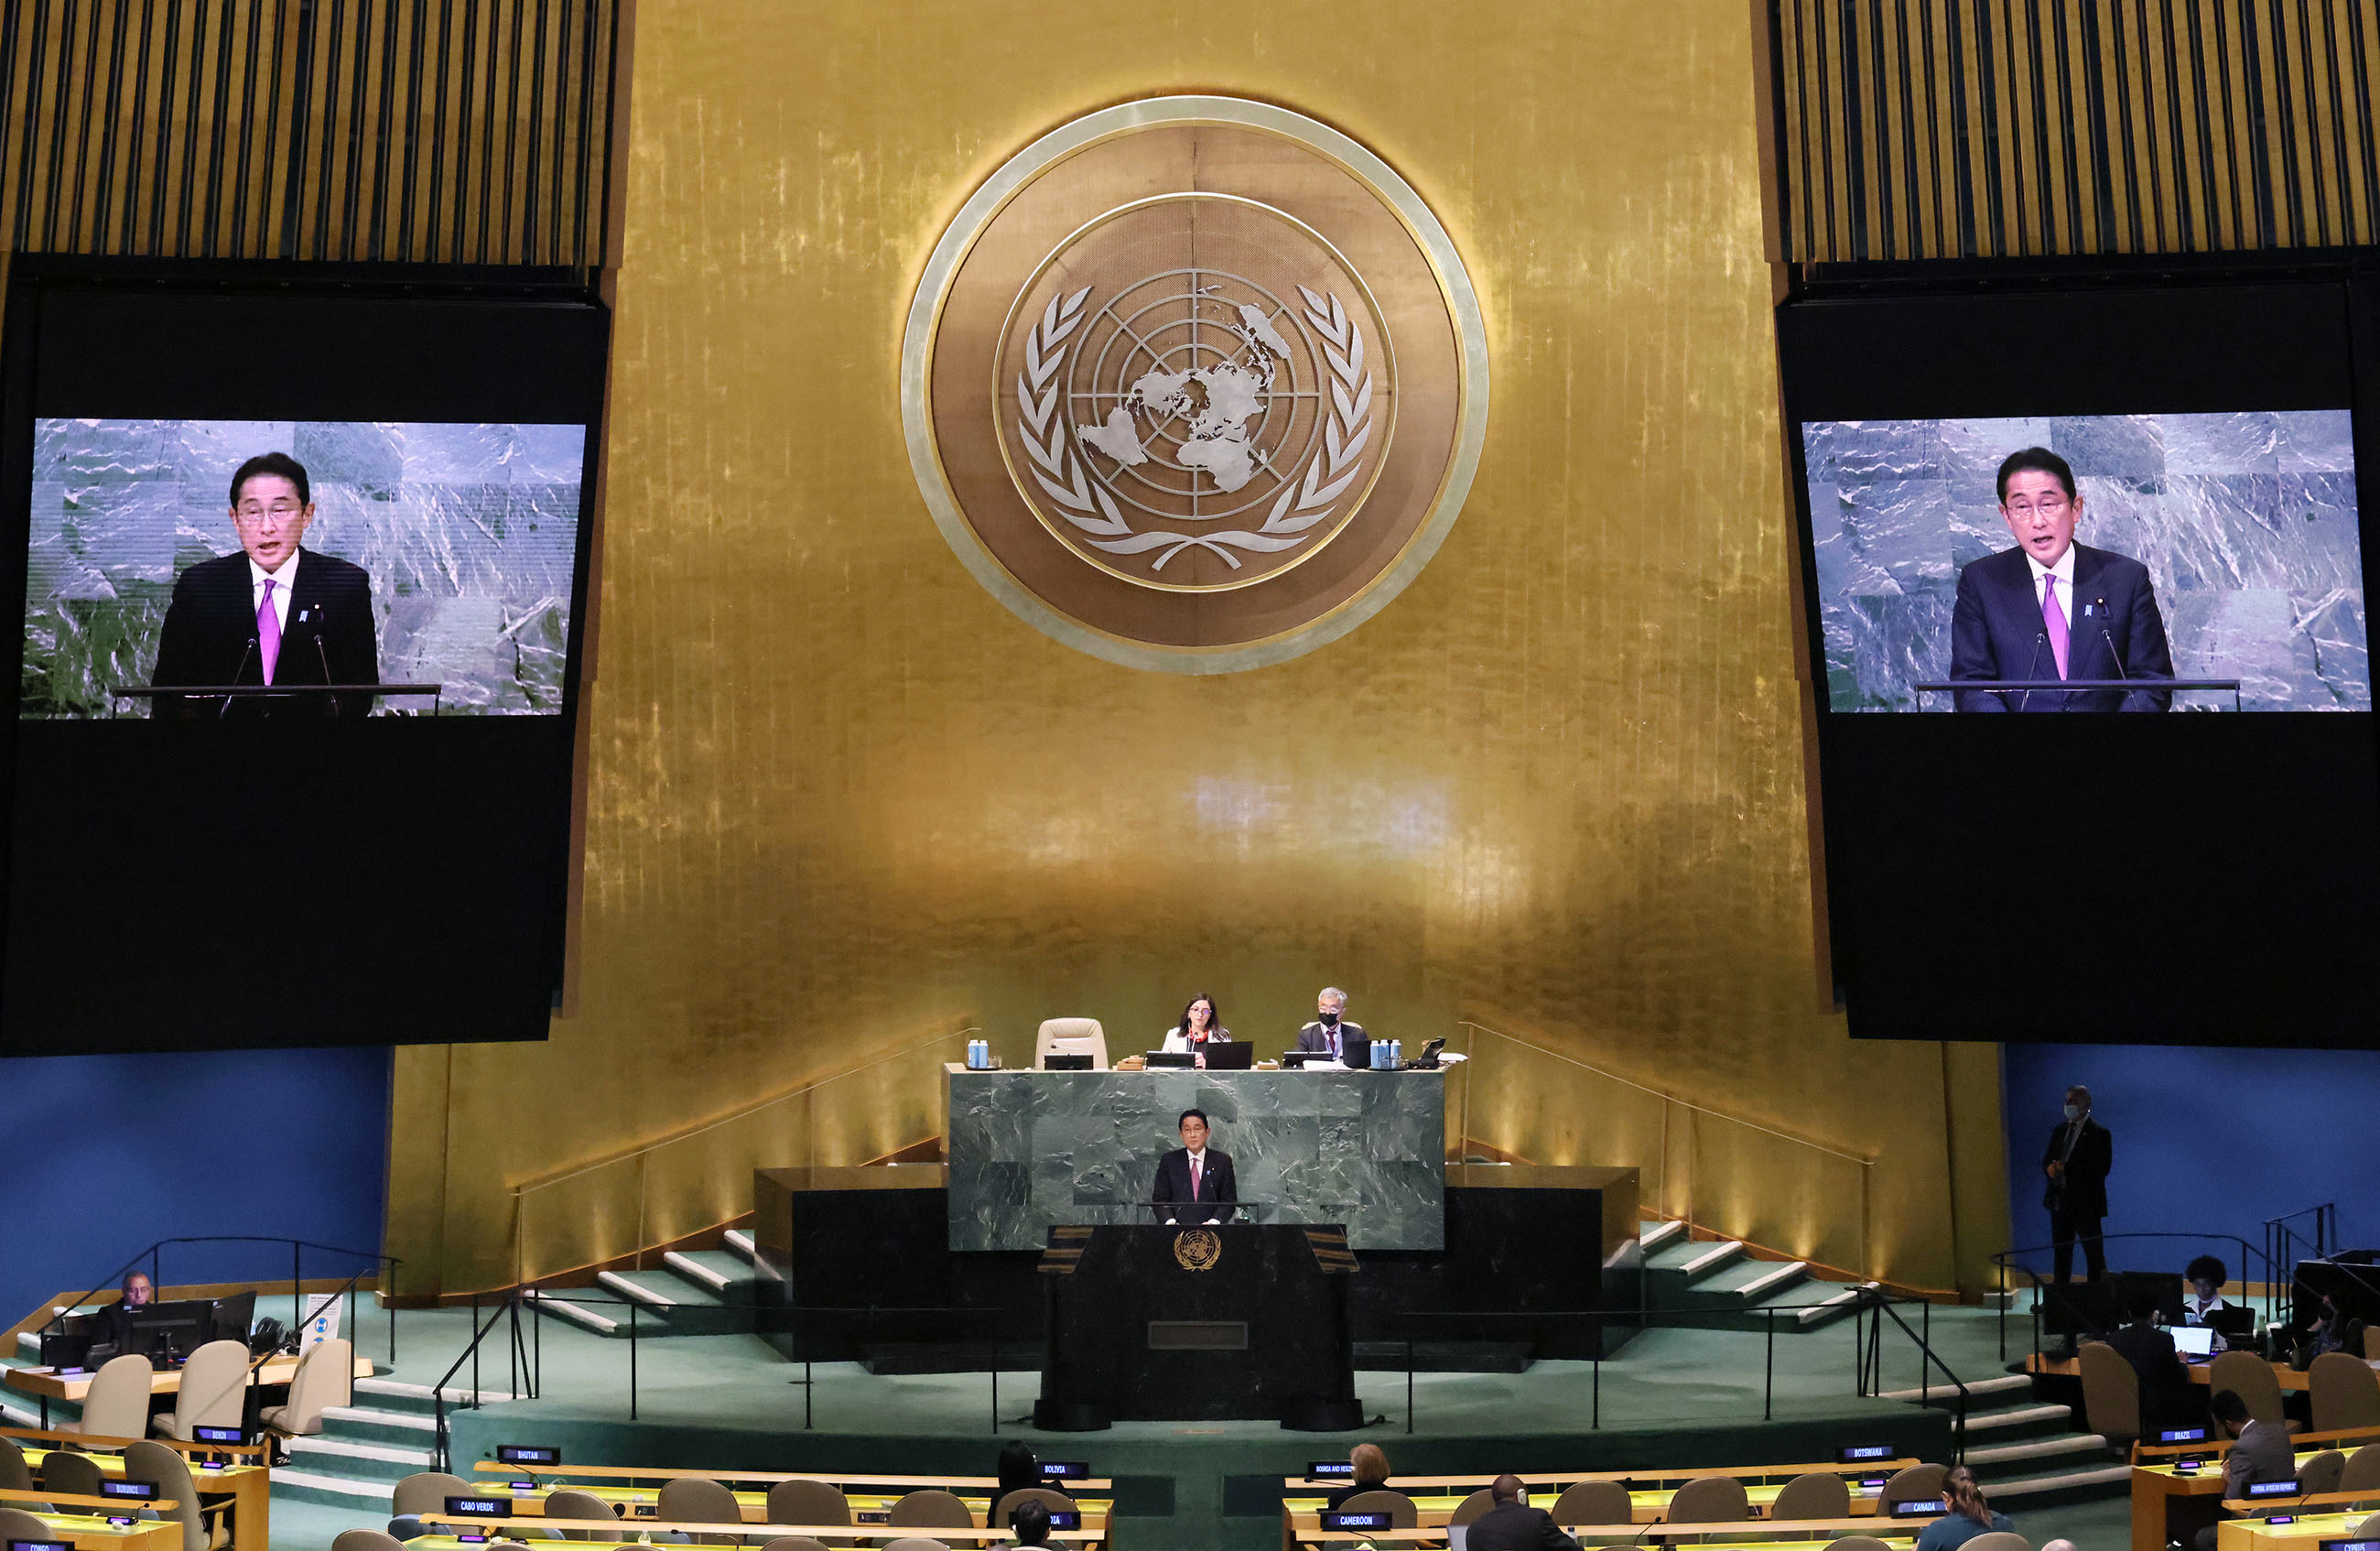 Photograph of the Prime Minister delivering an address at the United Nations General Assembly (8)